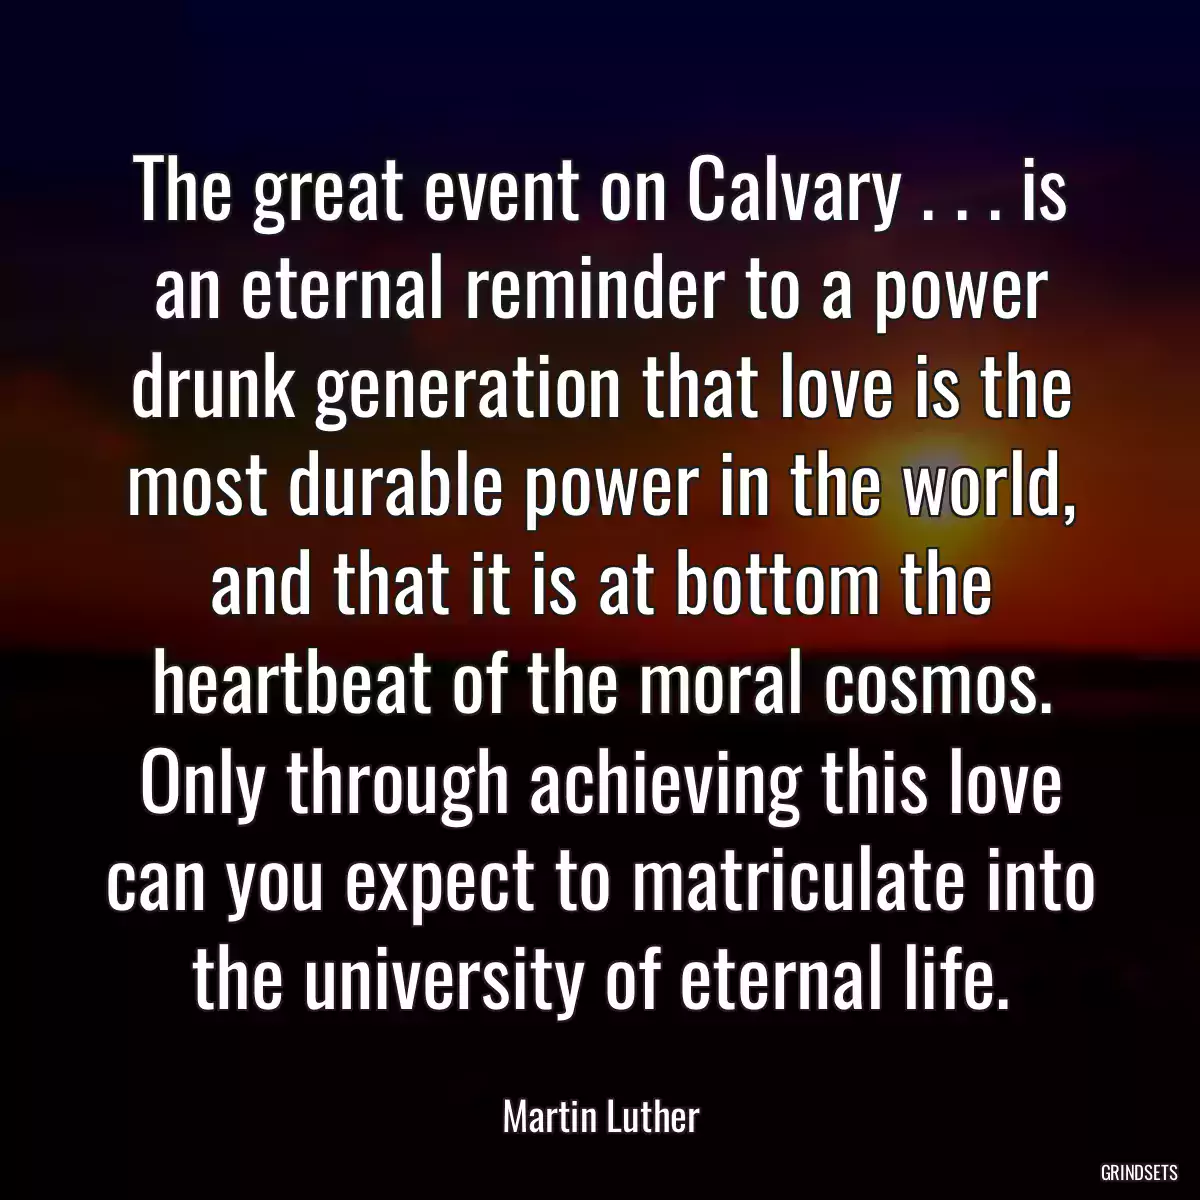 The great event on Calvary . . . is an eternal reminder to a power drunk generation that love is the most durable power in the world, and that it is at bottom the heartbeat of the moral cosmos. Only through achieving this love can you expect to matriculate into the university of eternal life.